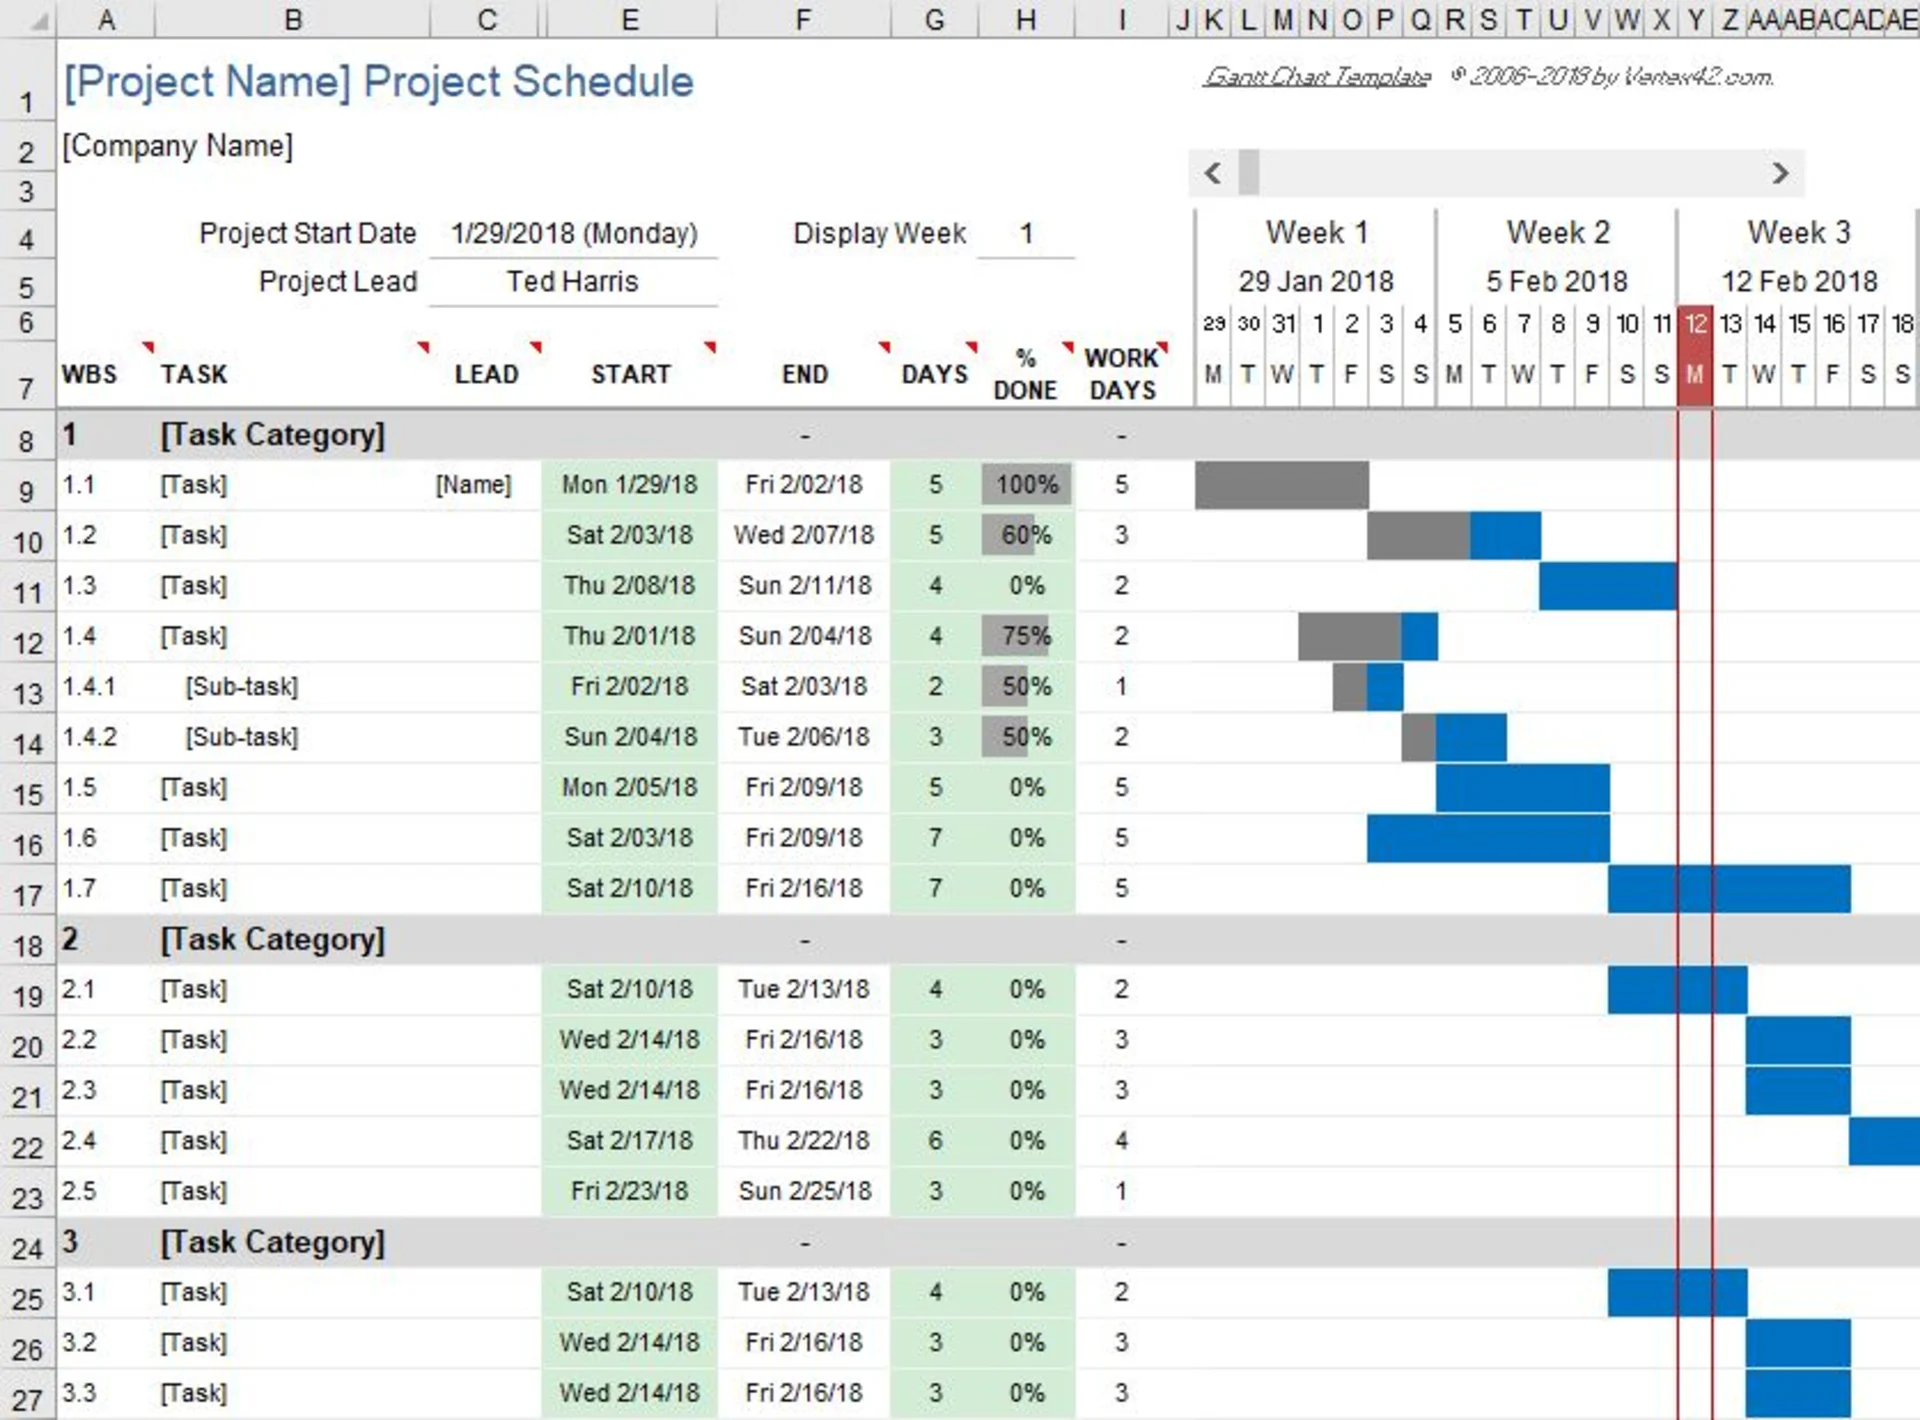 Microsoft Excel used for a Gantt Chart to manage tasks, events and projects.